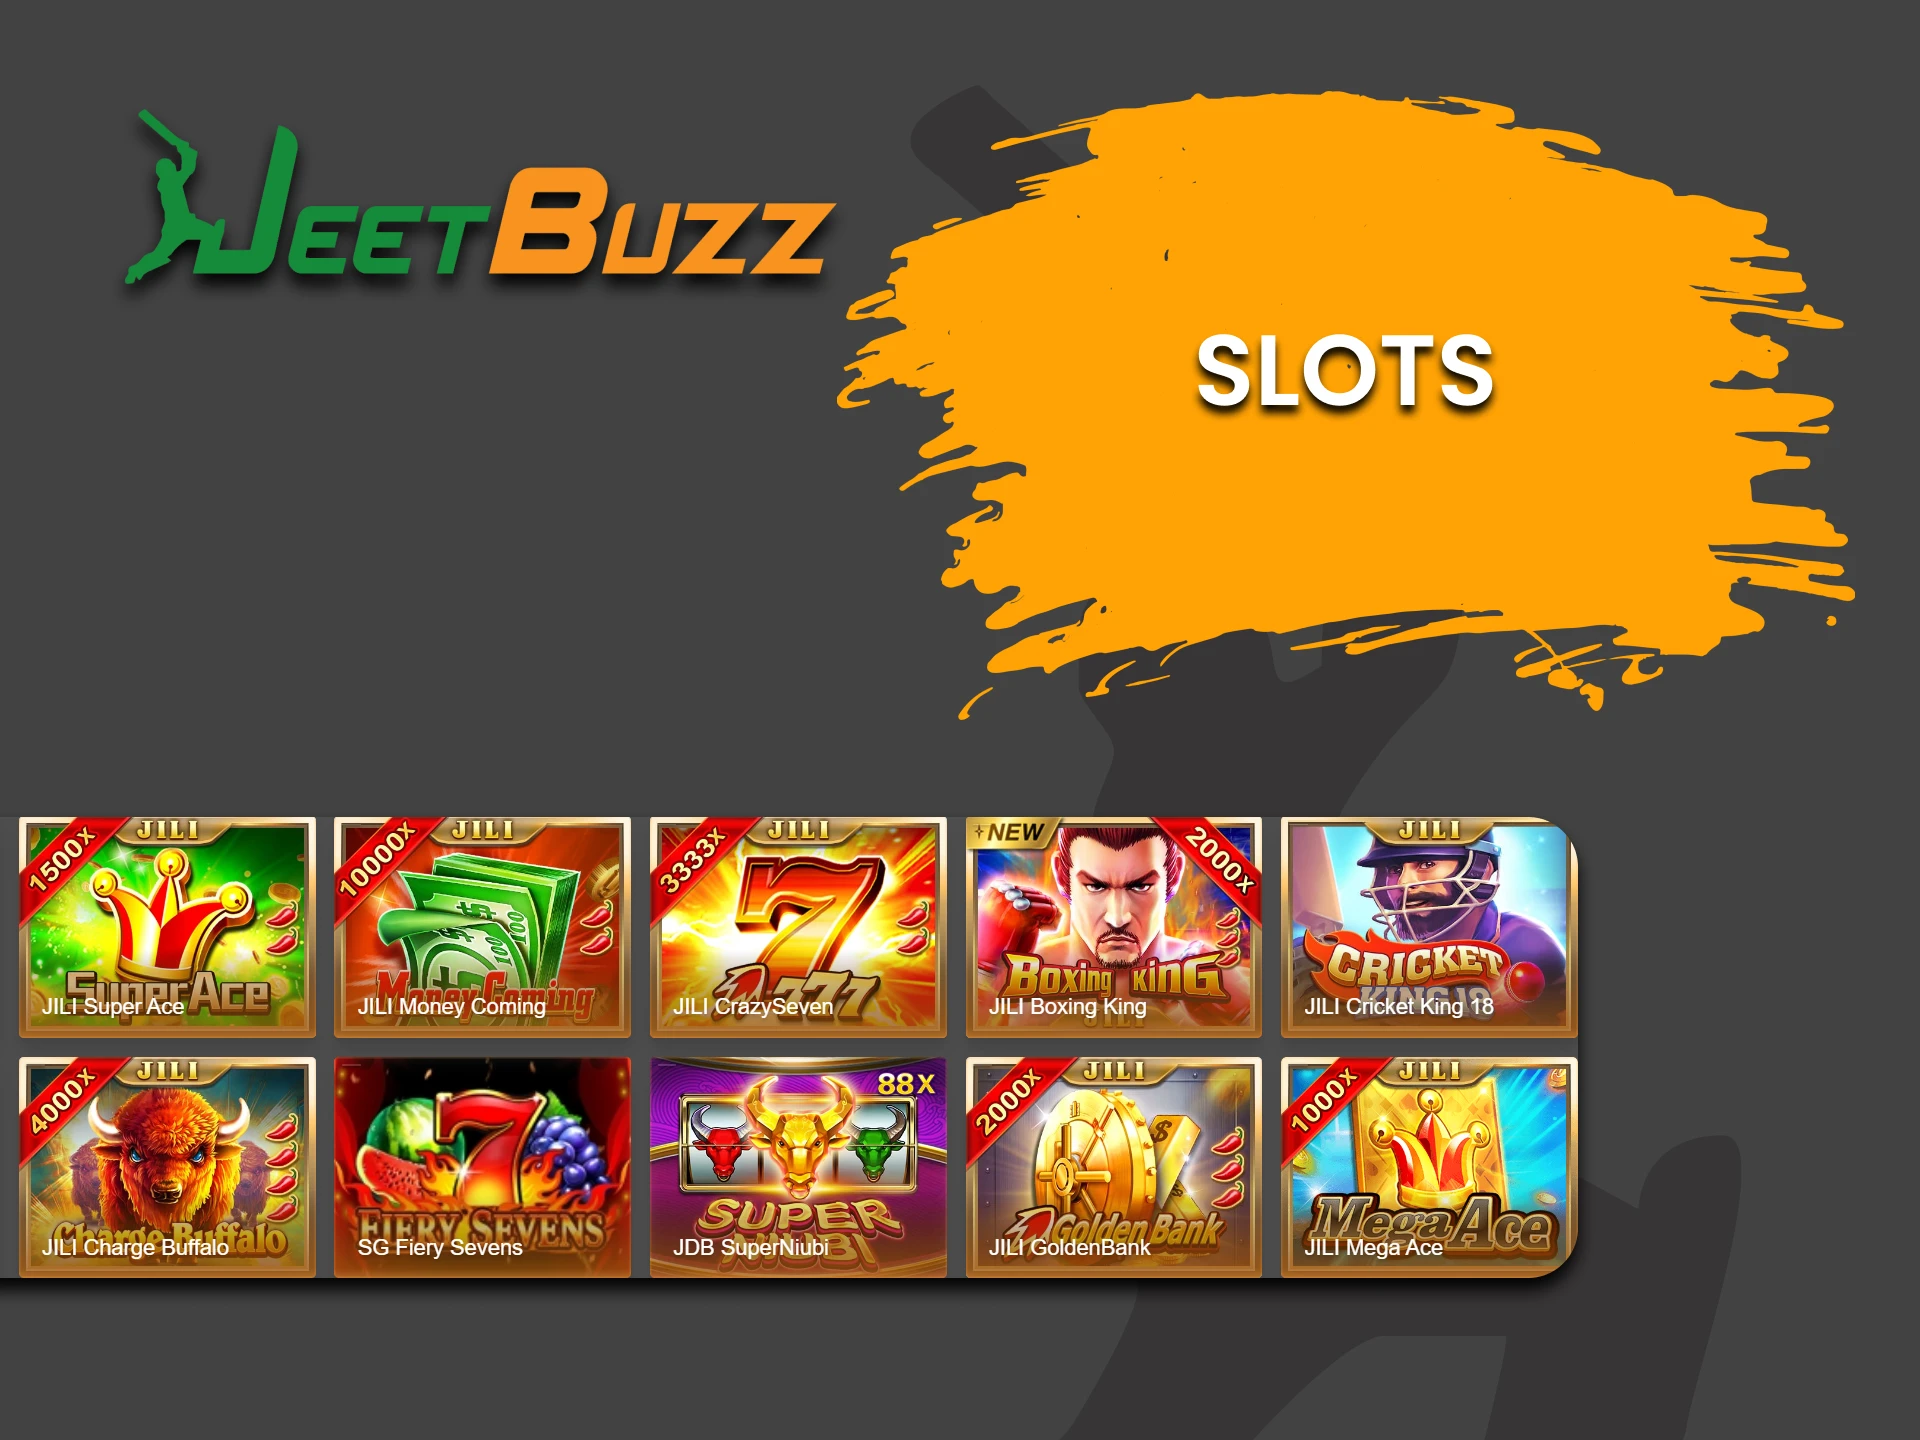 Go to the Slots section for casino games on JeetBuzz.